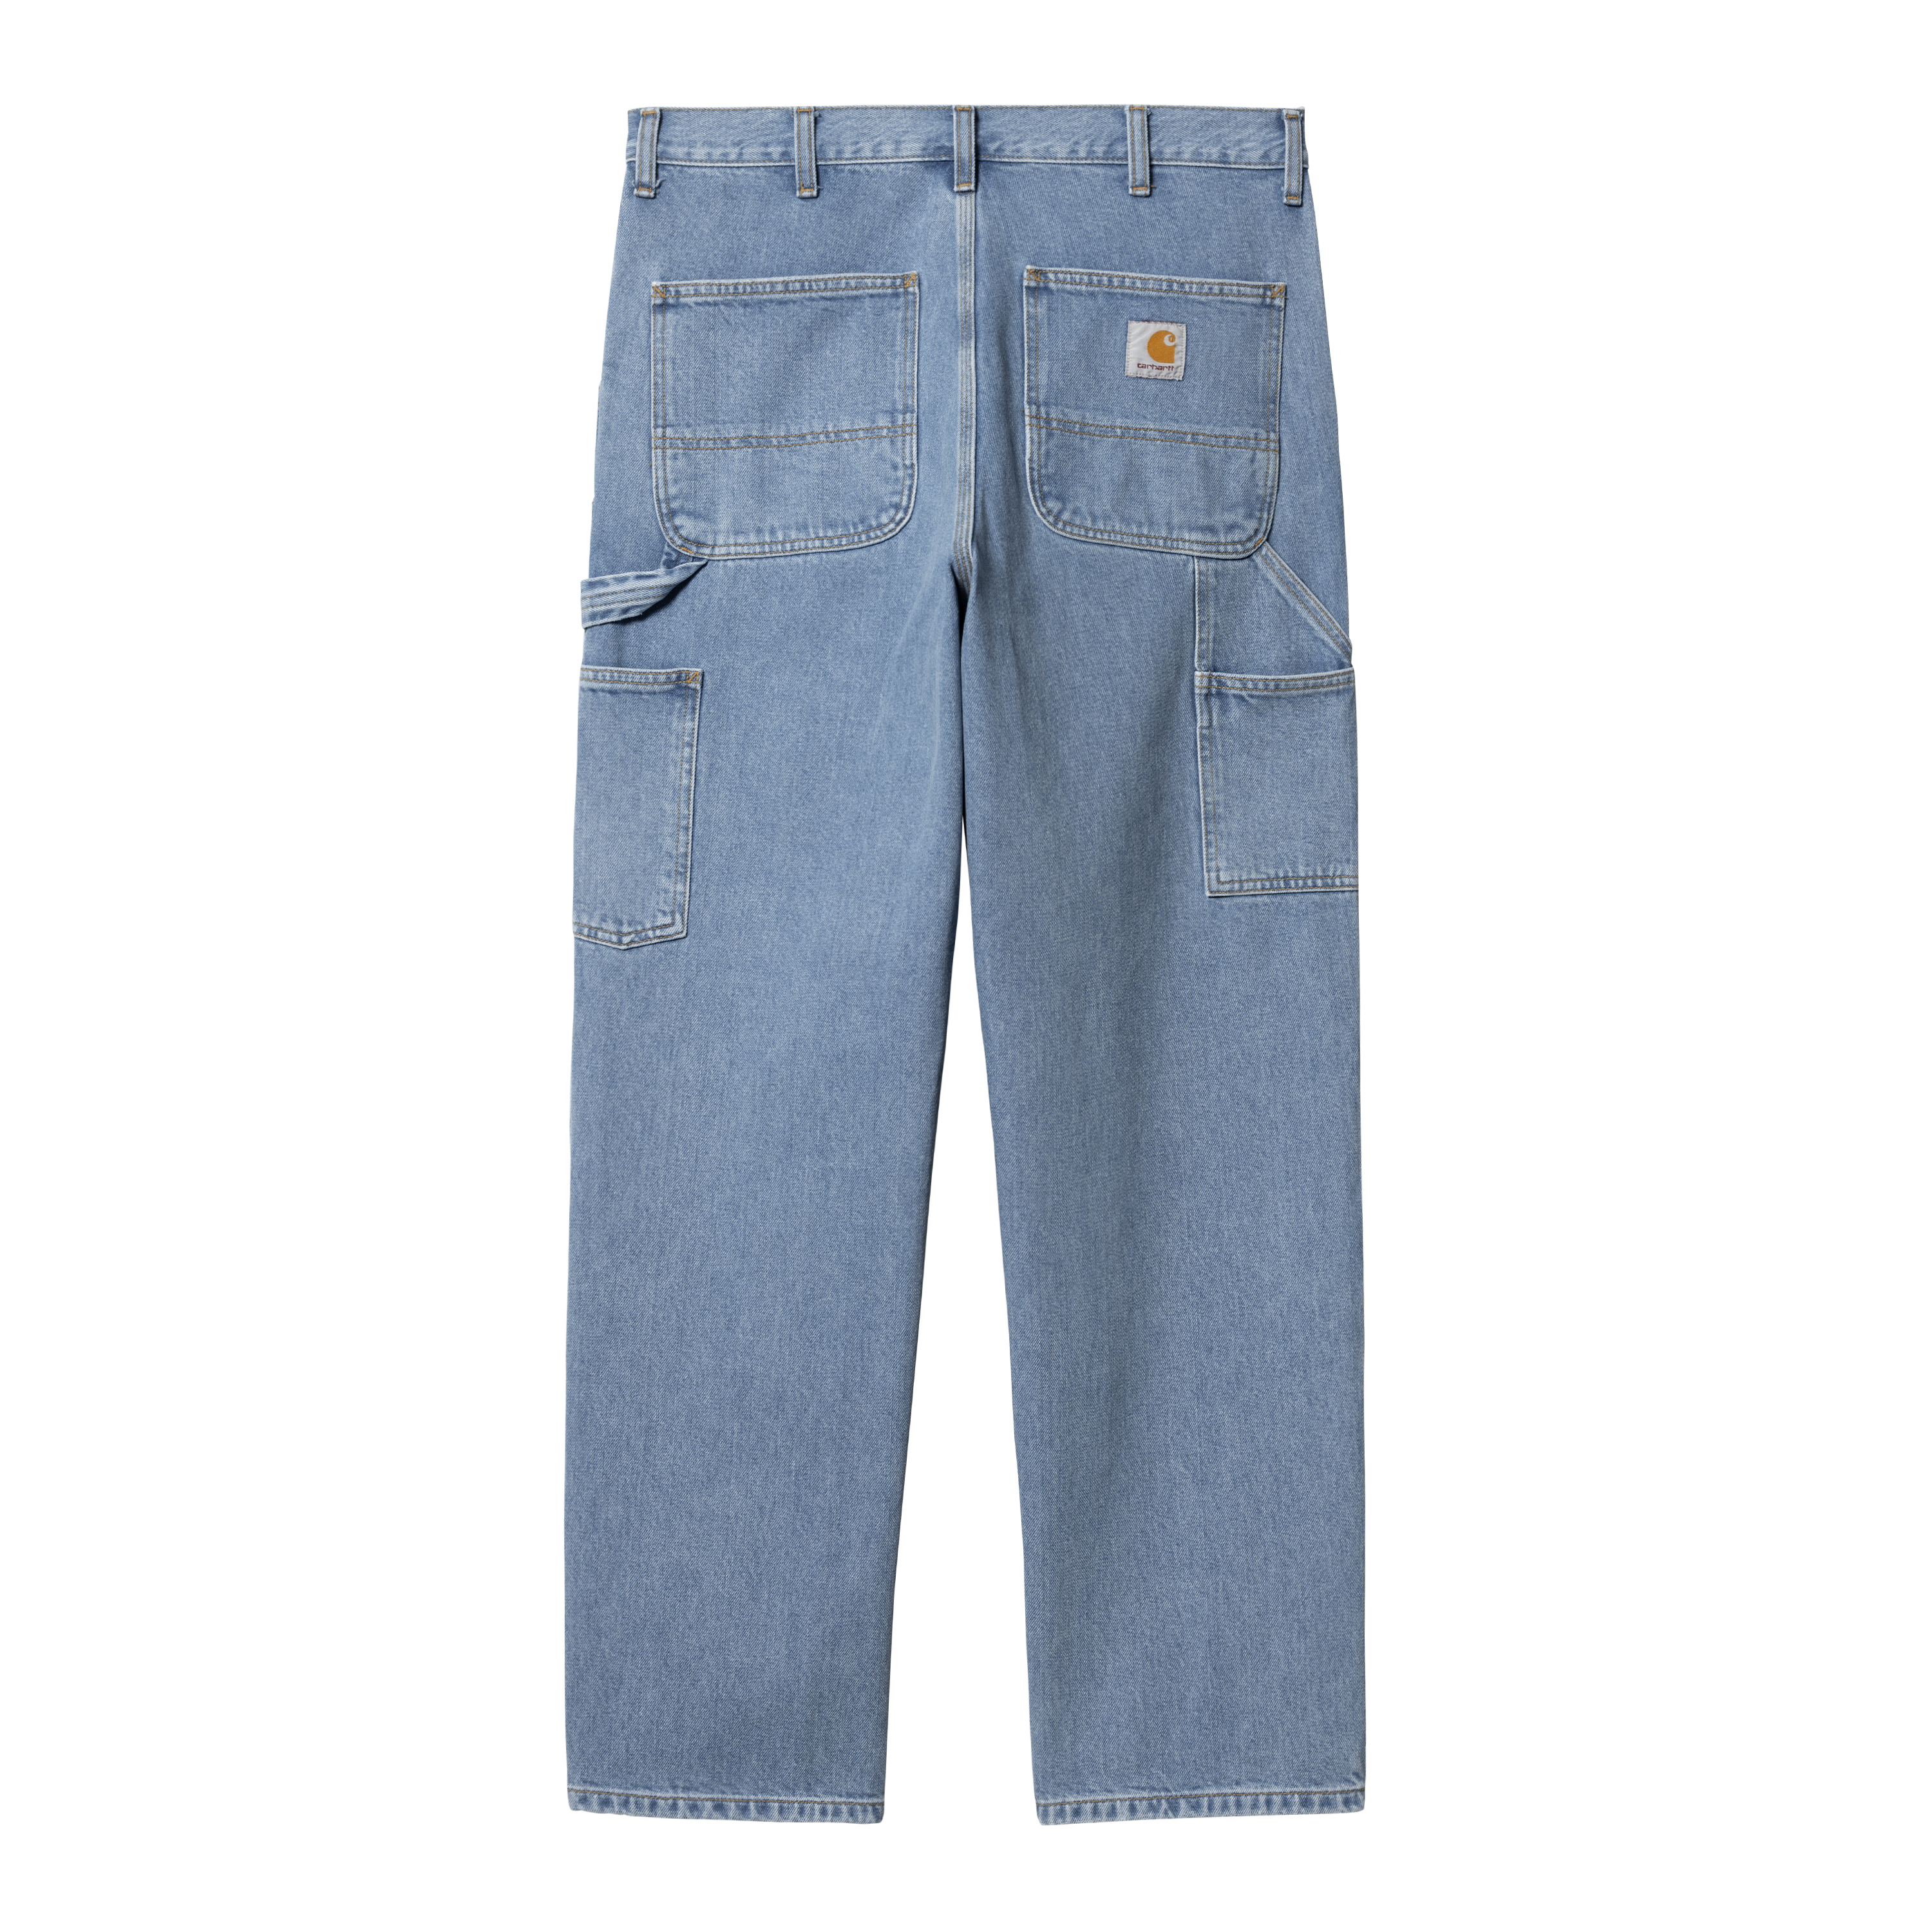 Carhartt, Jeans, Carhartt 1495 420 Vintage 90s Traditional Fit Jeans Size  40 X 30